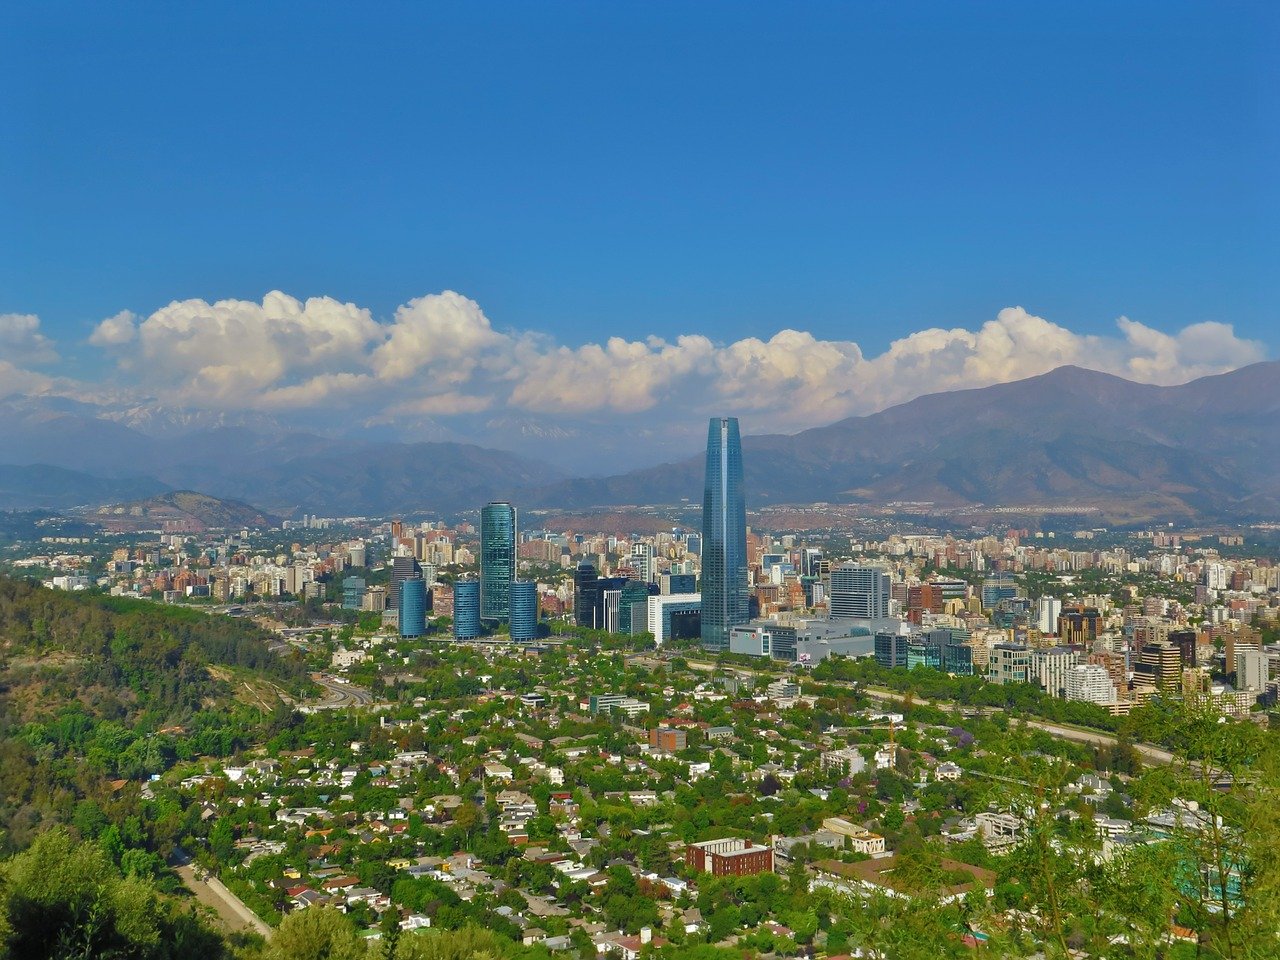 A day in Santiago